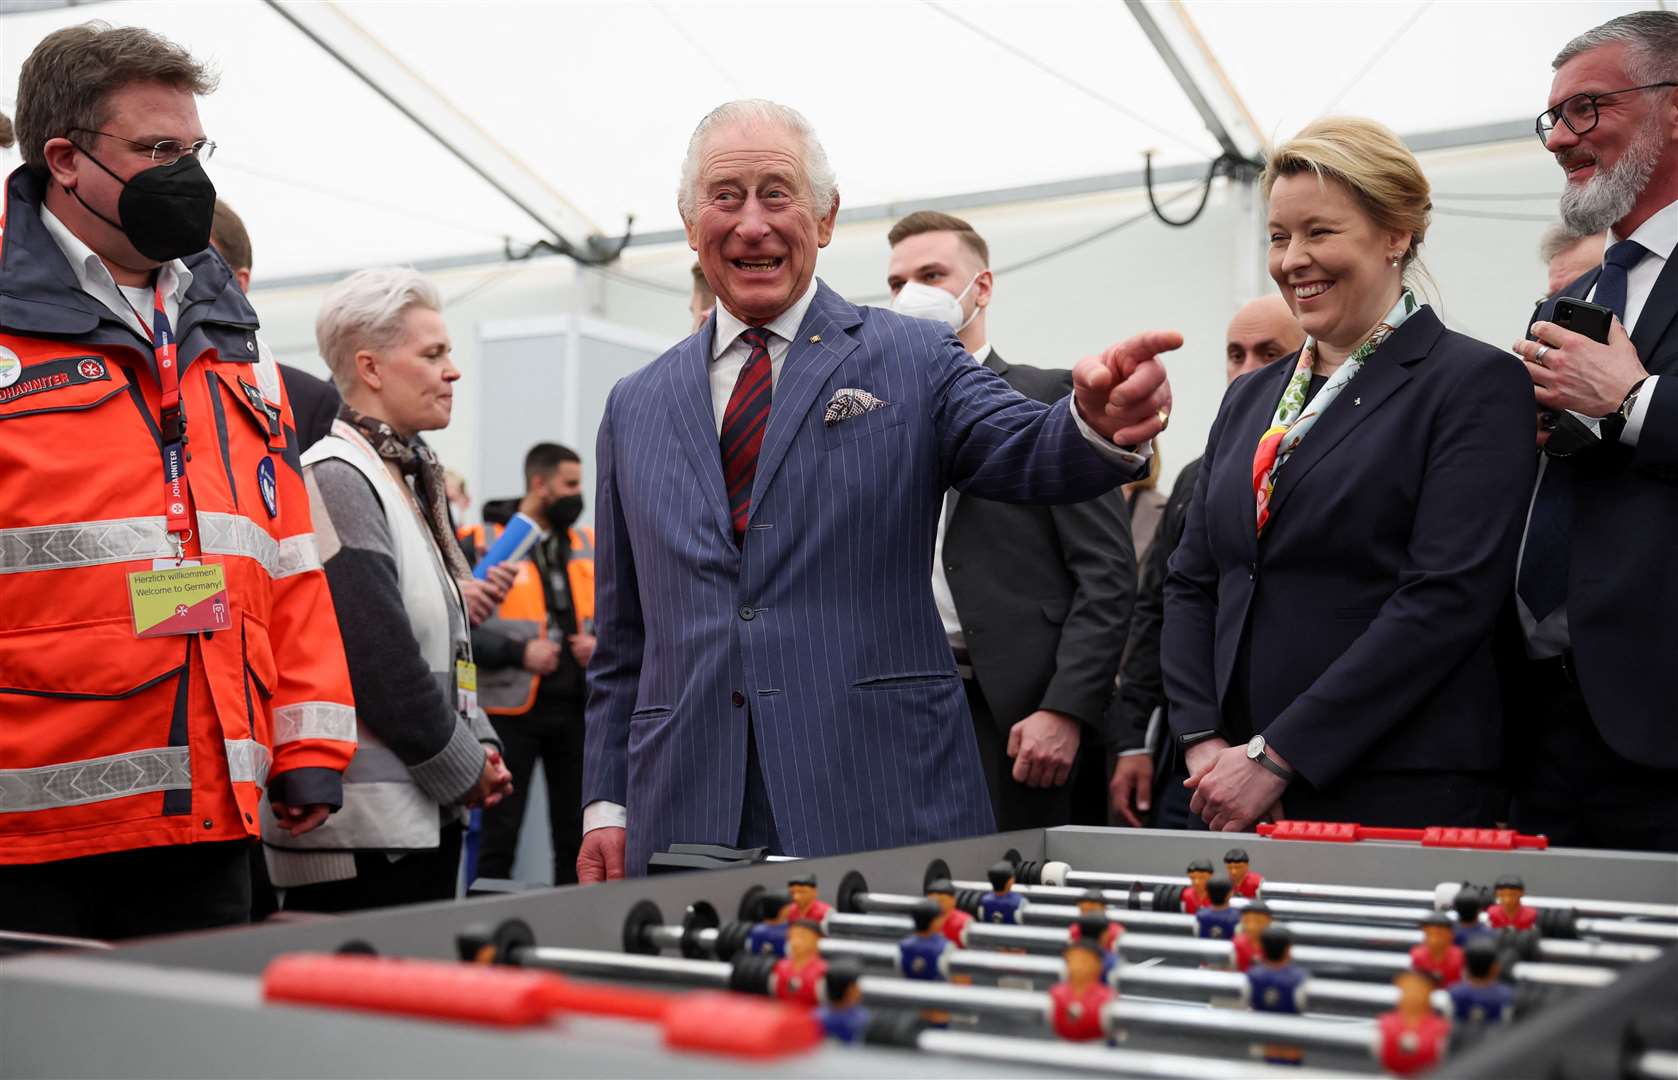 A game of table football was among the activities (Phil Noble/PA)